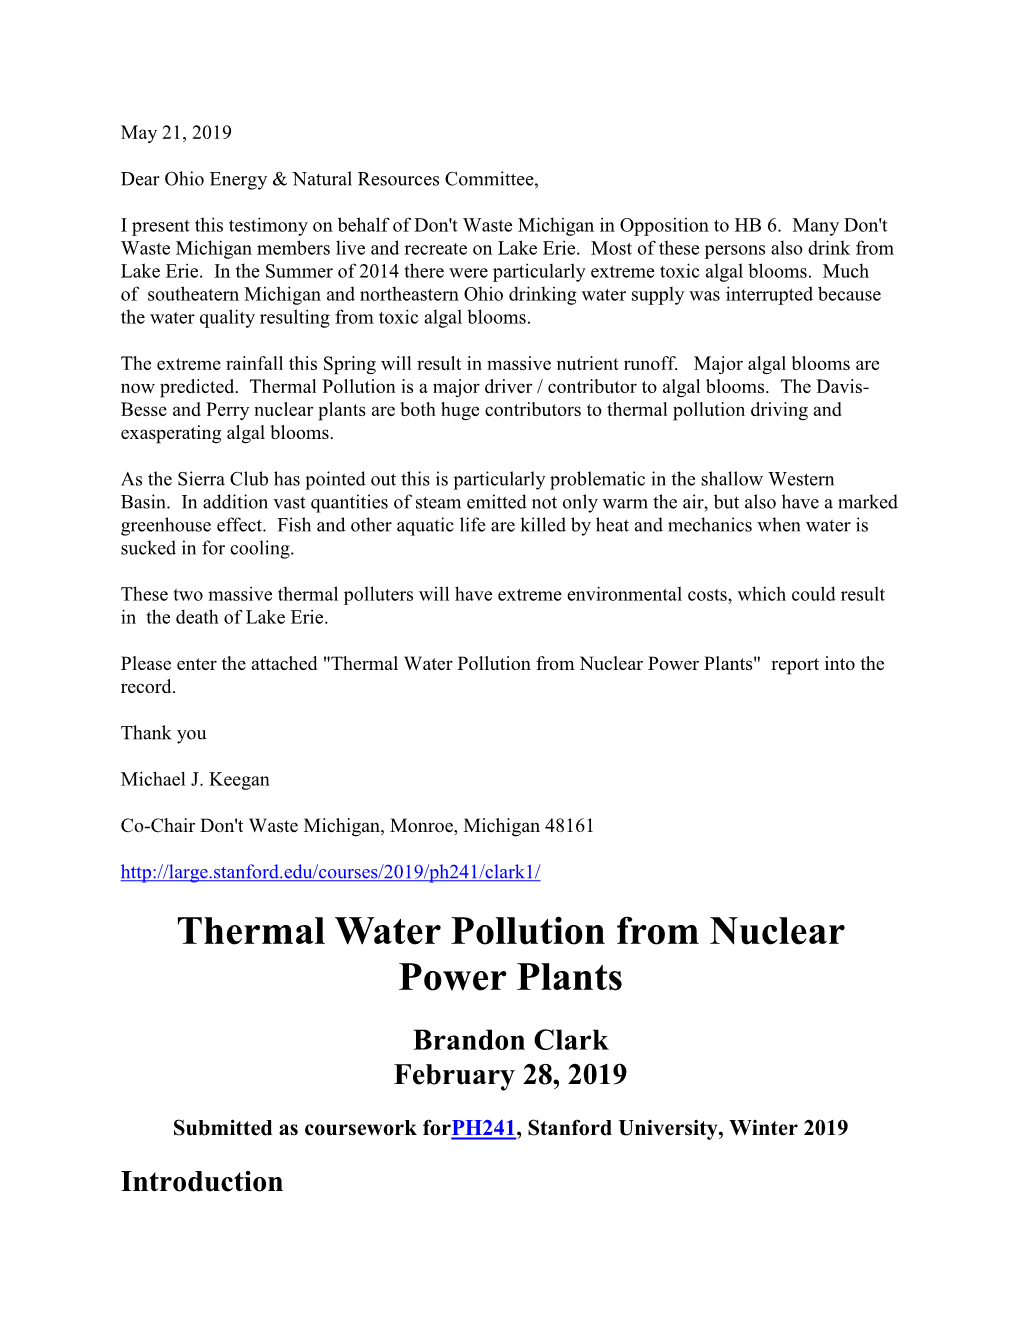 Thermal Water Pollution from Nuclear Power Plants" Report Into the Record